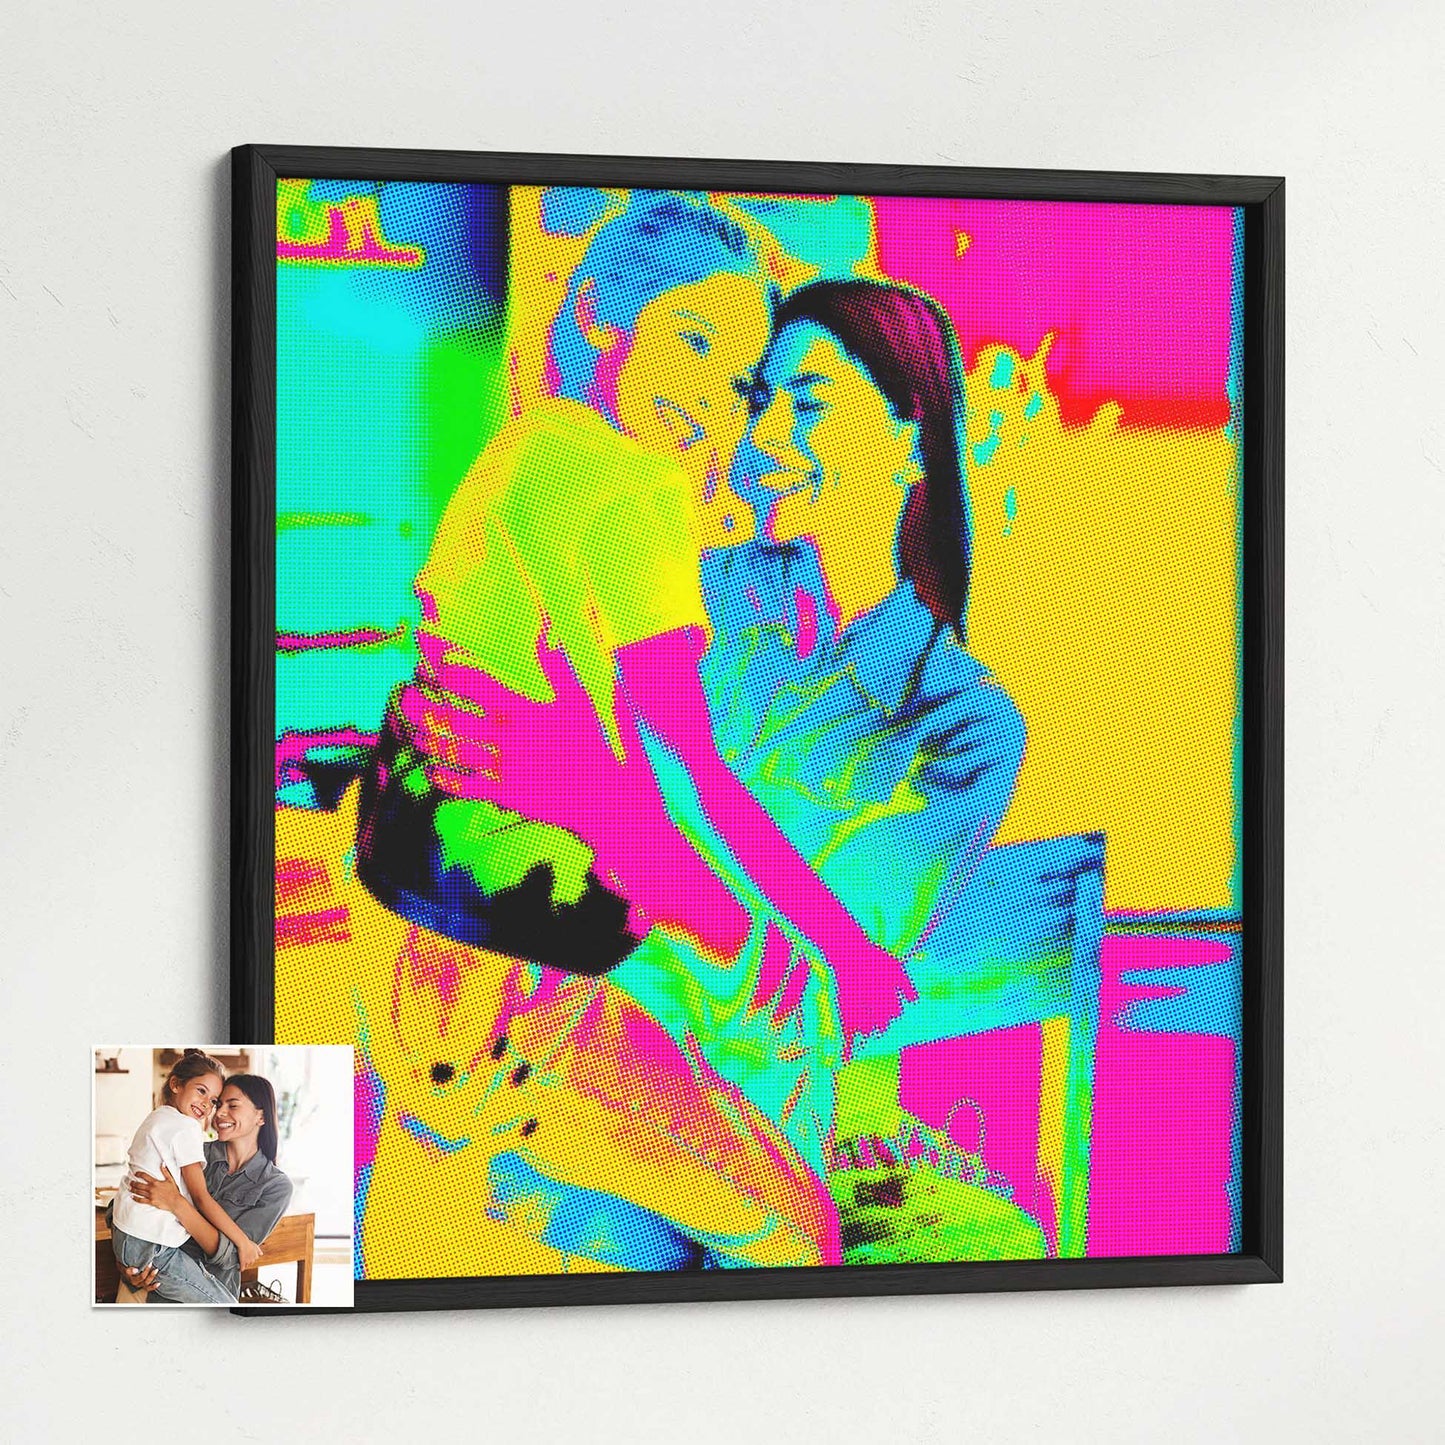 Embrace the spirit of pop art with our Personalised Pop Art Framed Print. Crafted through printing from photo, it features a captivating pop art style with a halftone effect. The bold and expressive colors of pink, orange, green, and blue 